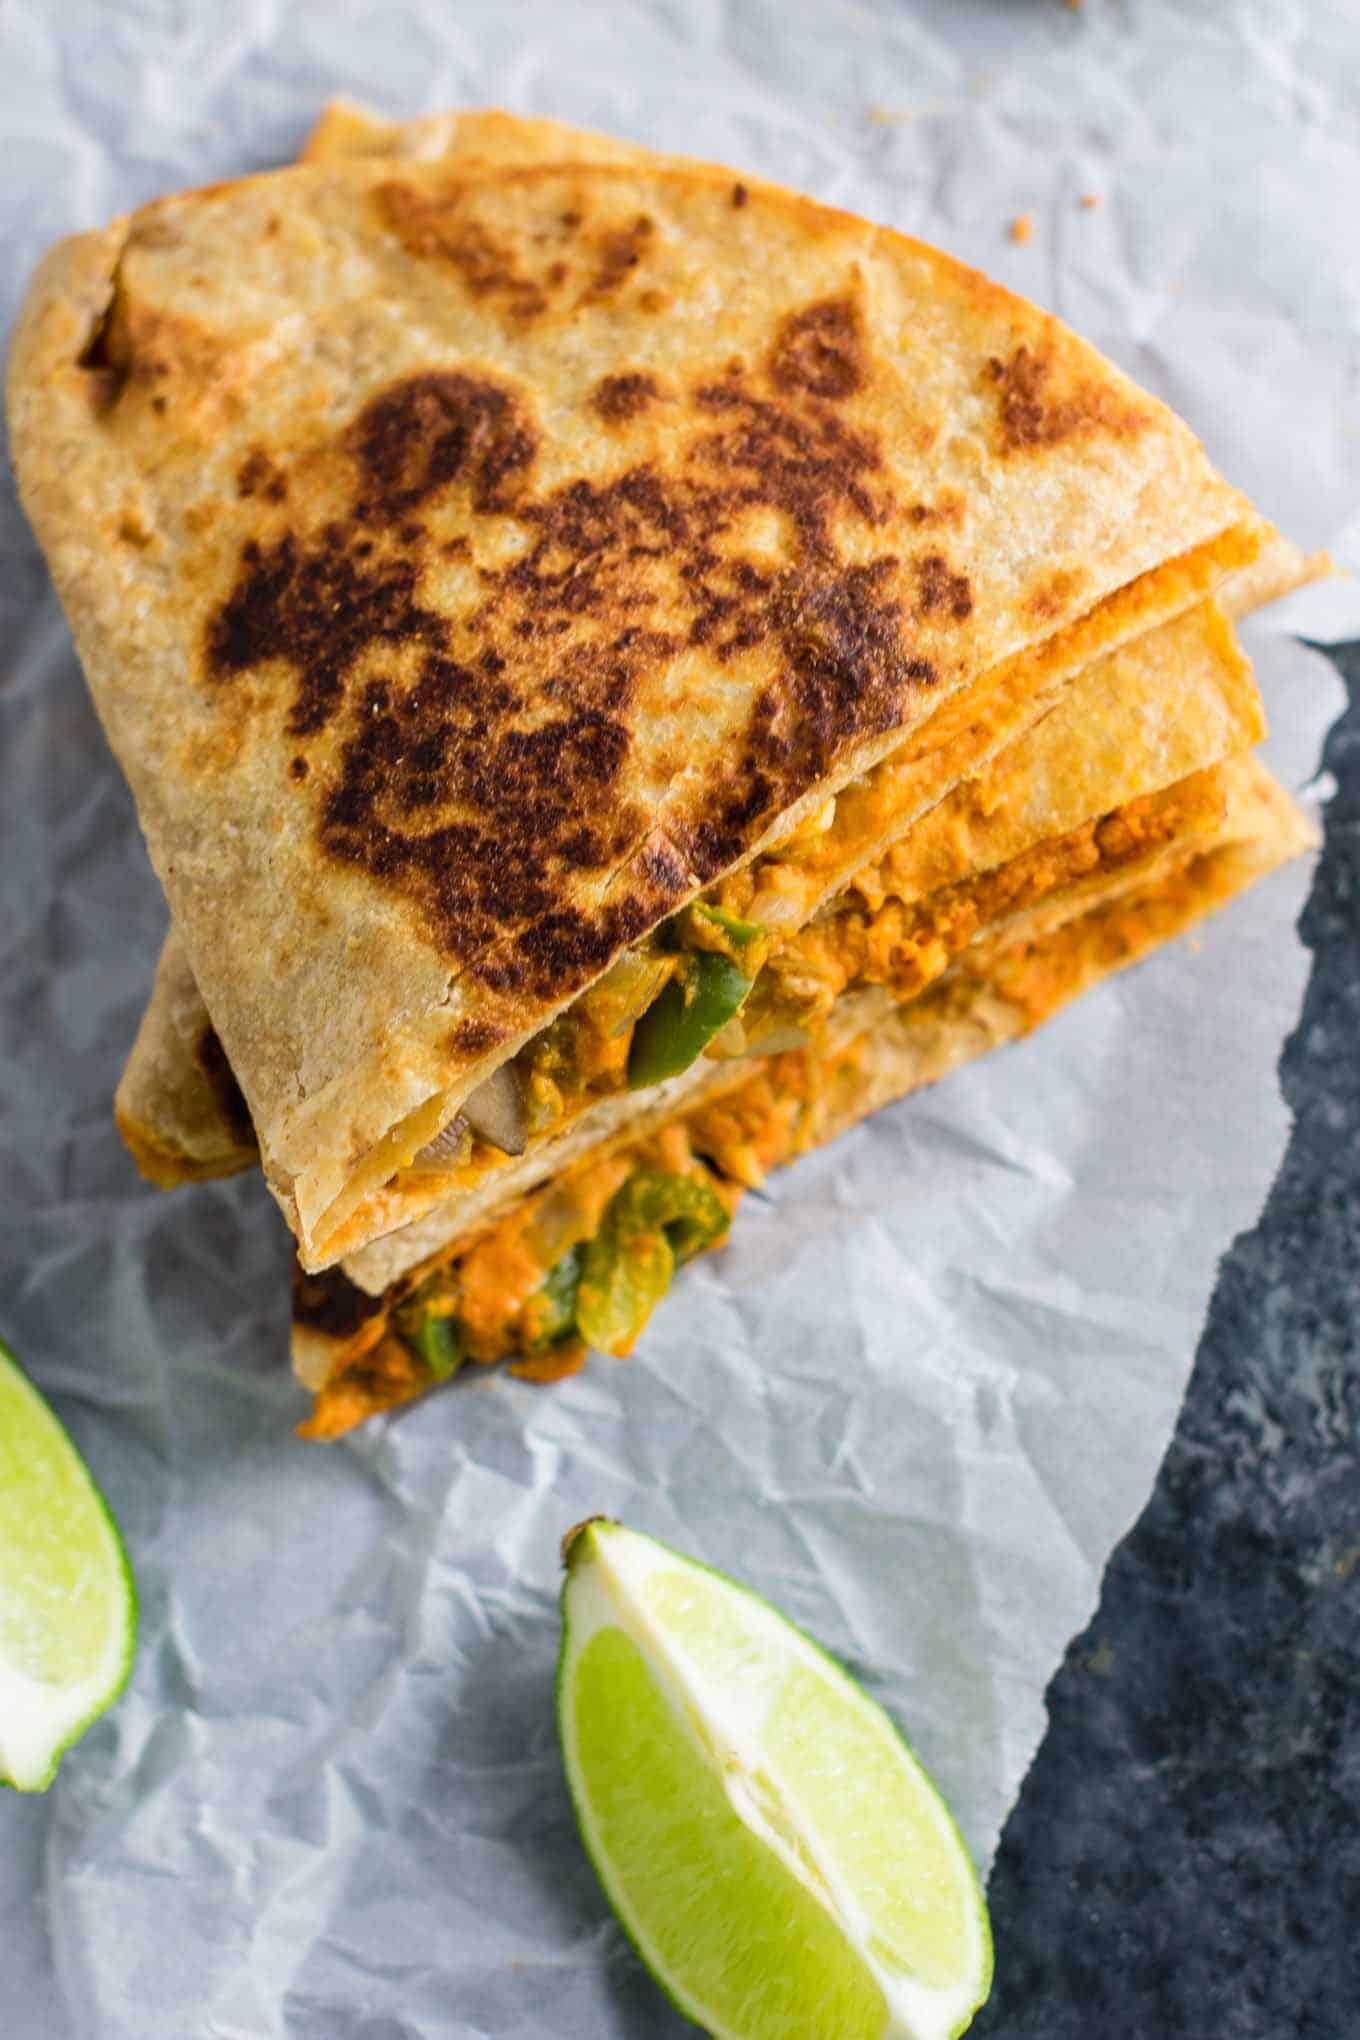 Easy vegan quesadillas recipe packed full of protein and flavor. No meat, no dairy, no vegan cheese! It's a Mexican favorite gone vegan! #vegan #quesadillas #meatless #veganmexican #veganquesadilla #dinner #recipes